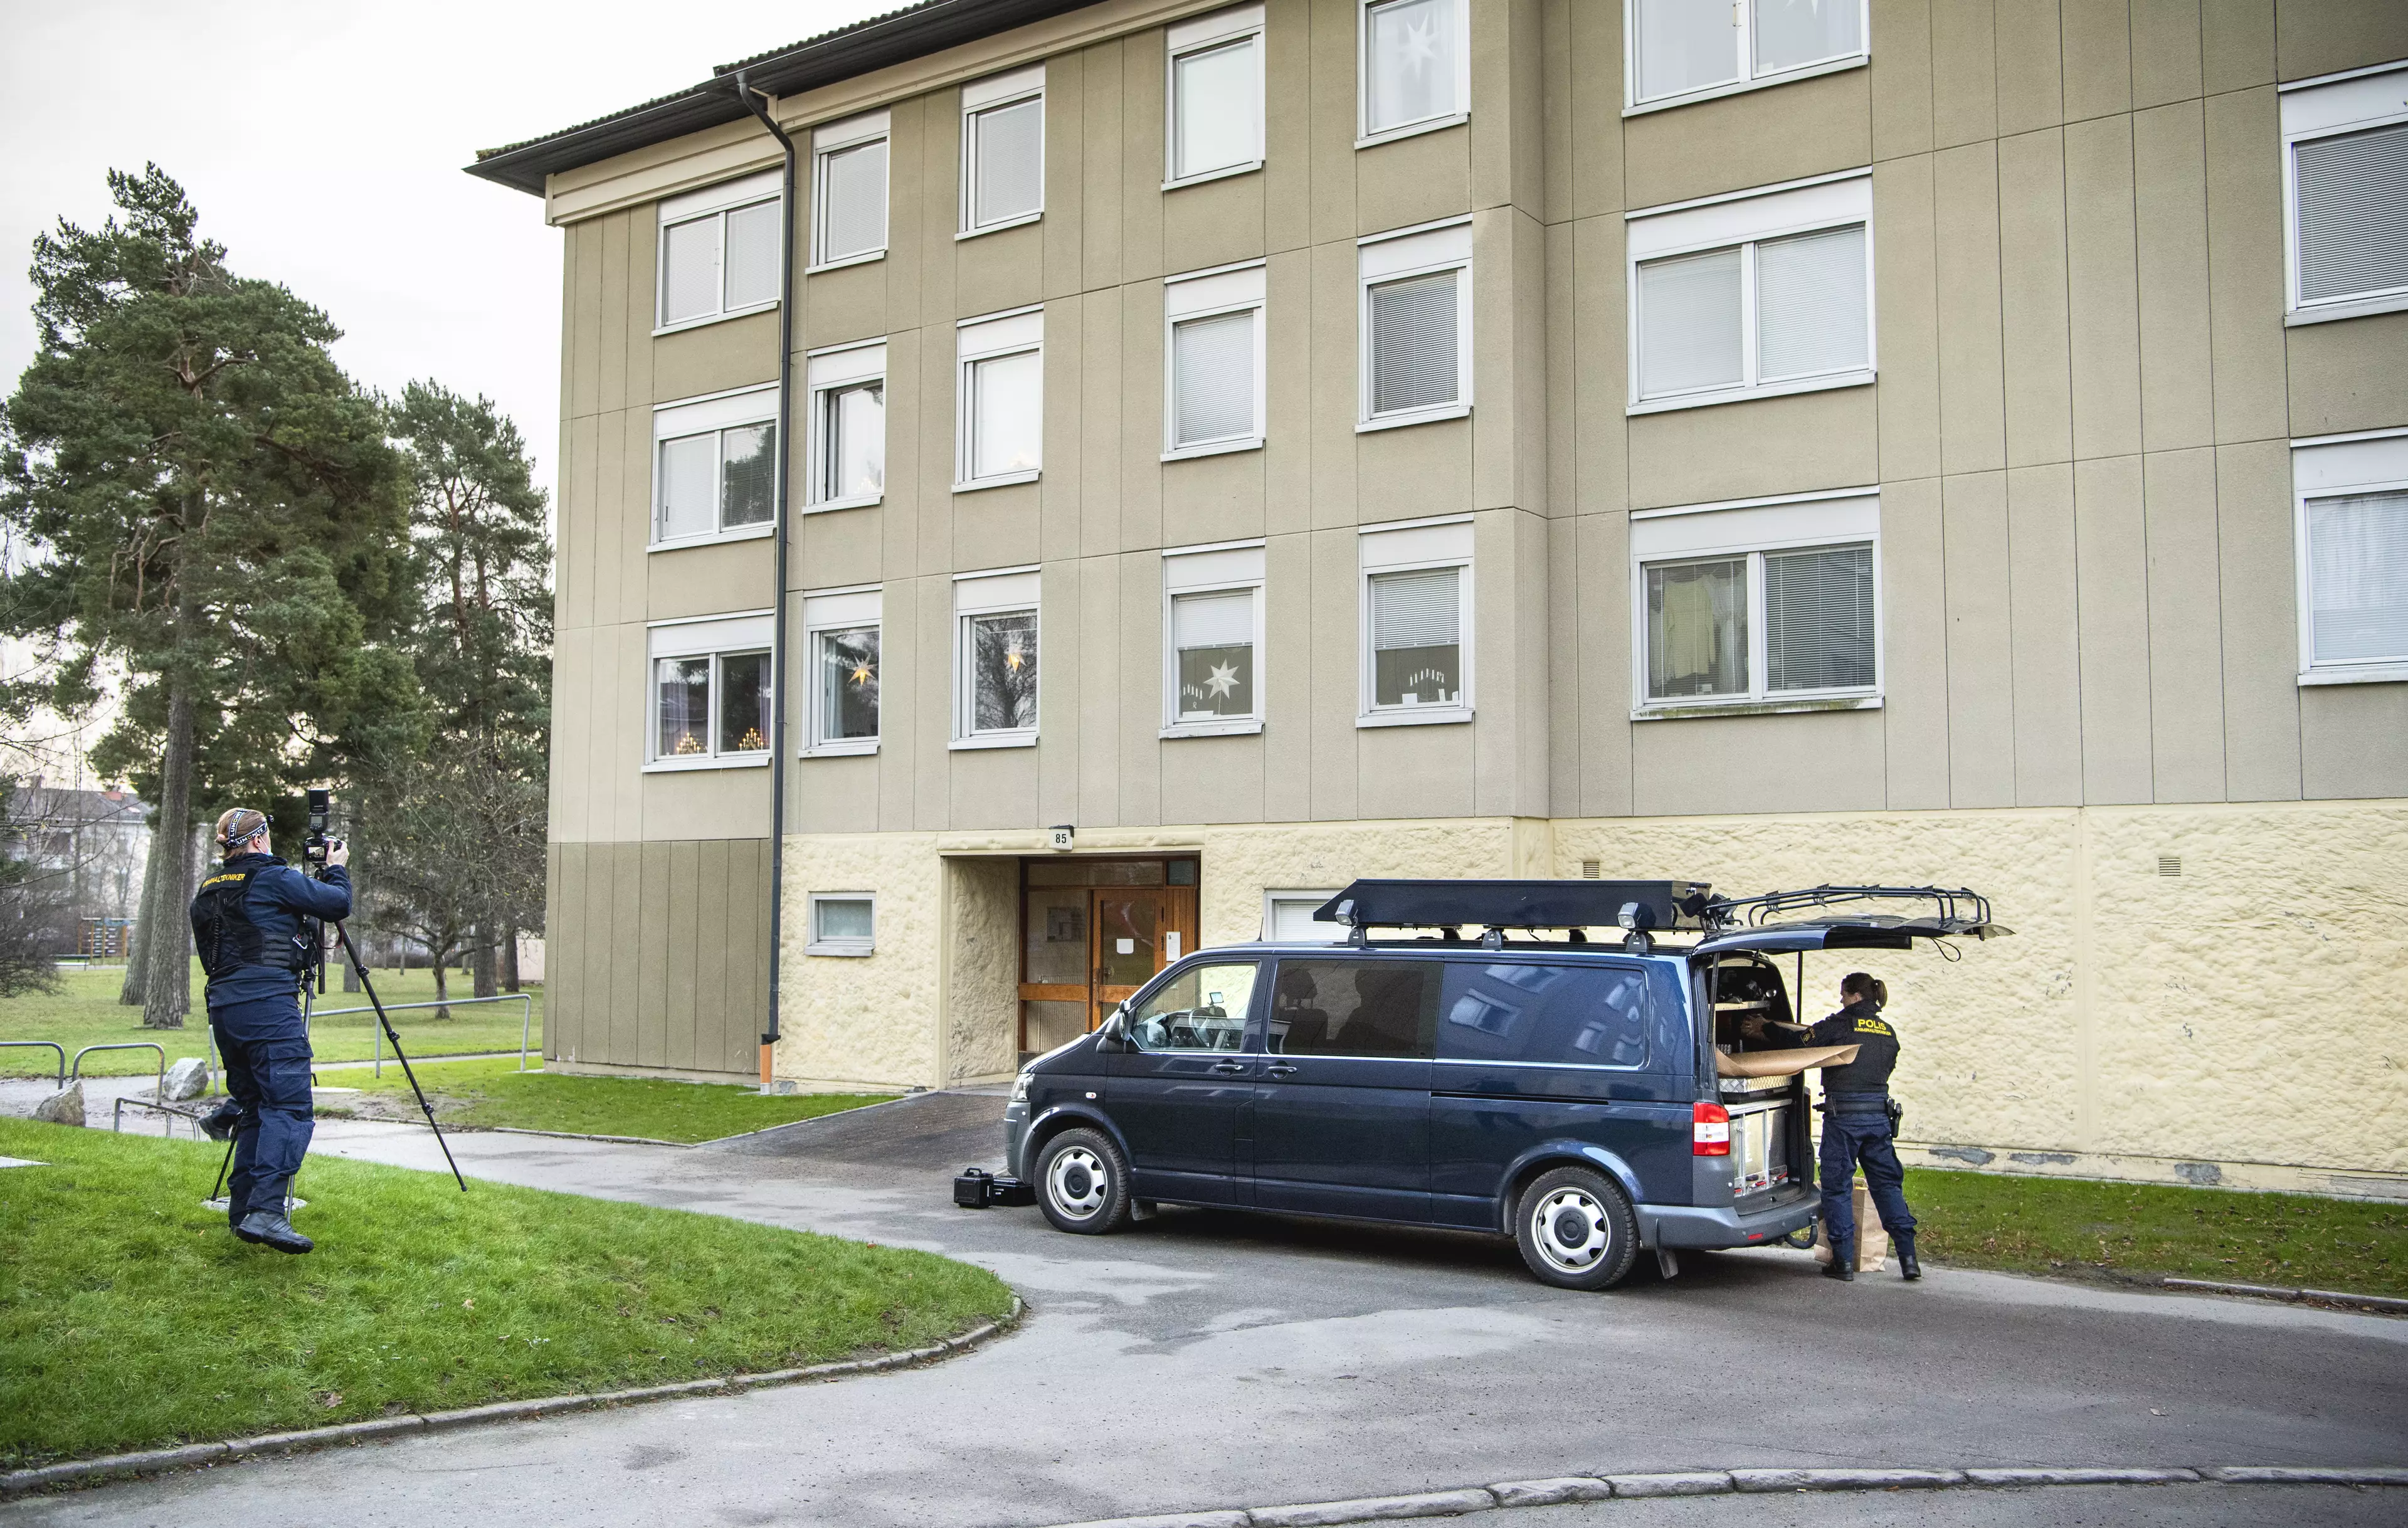 Police at the scene of the apartment where a woman is suspected of locking up her son, in Haninge, south of Stockholm.